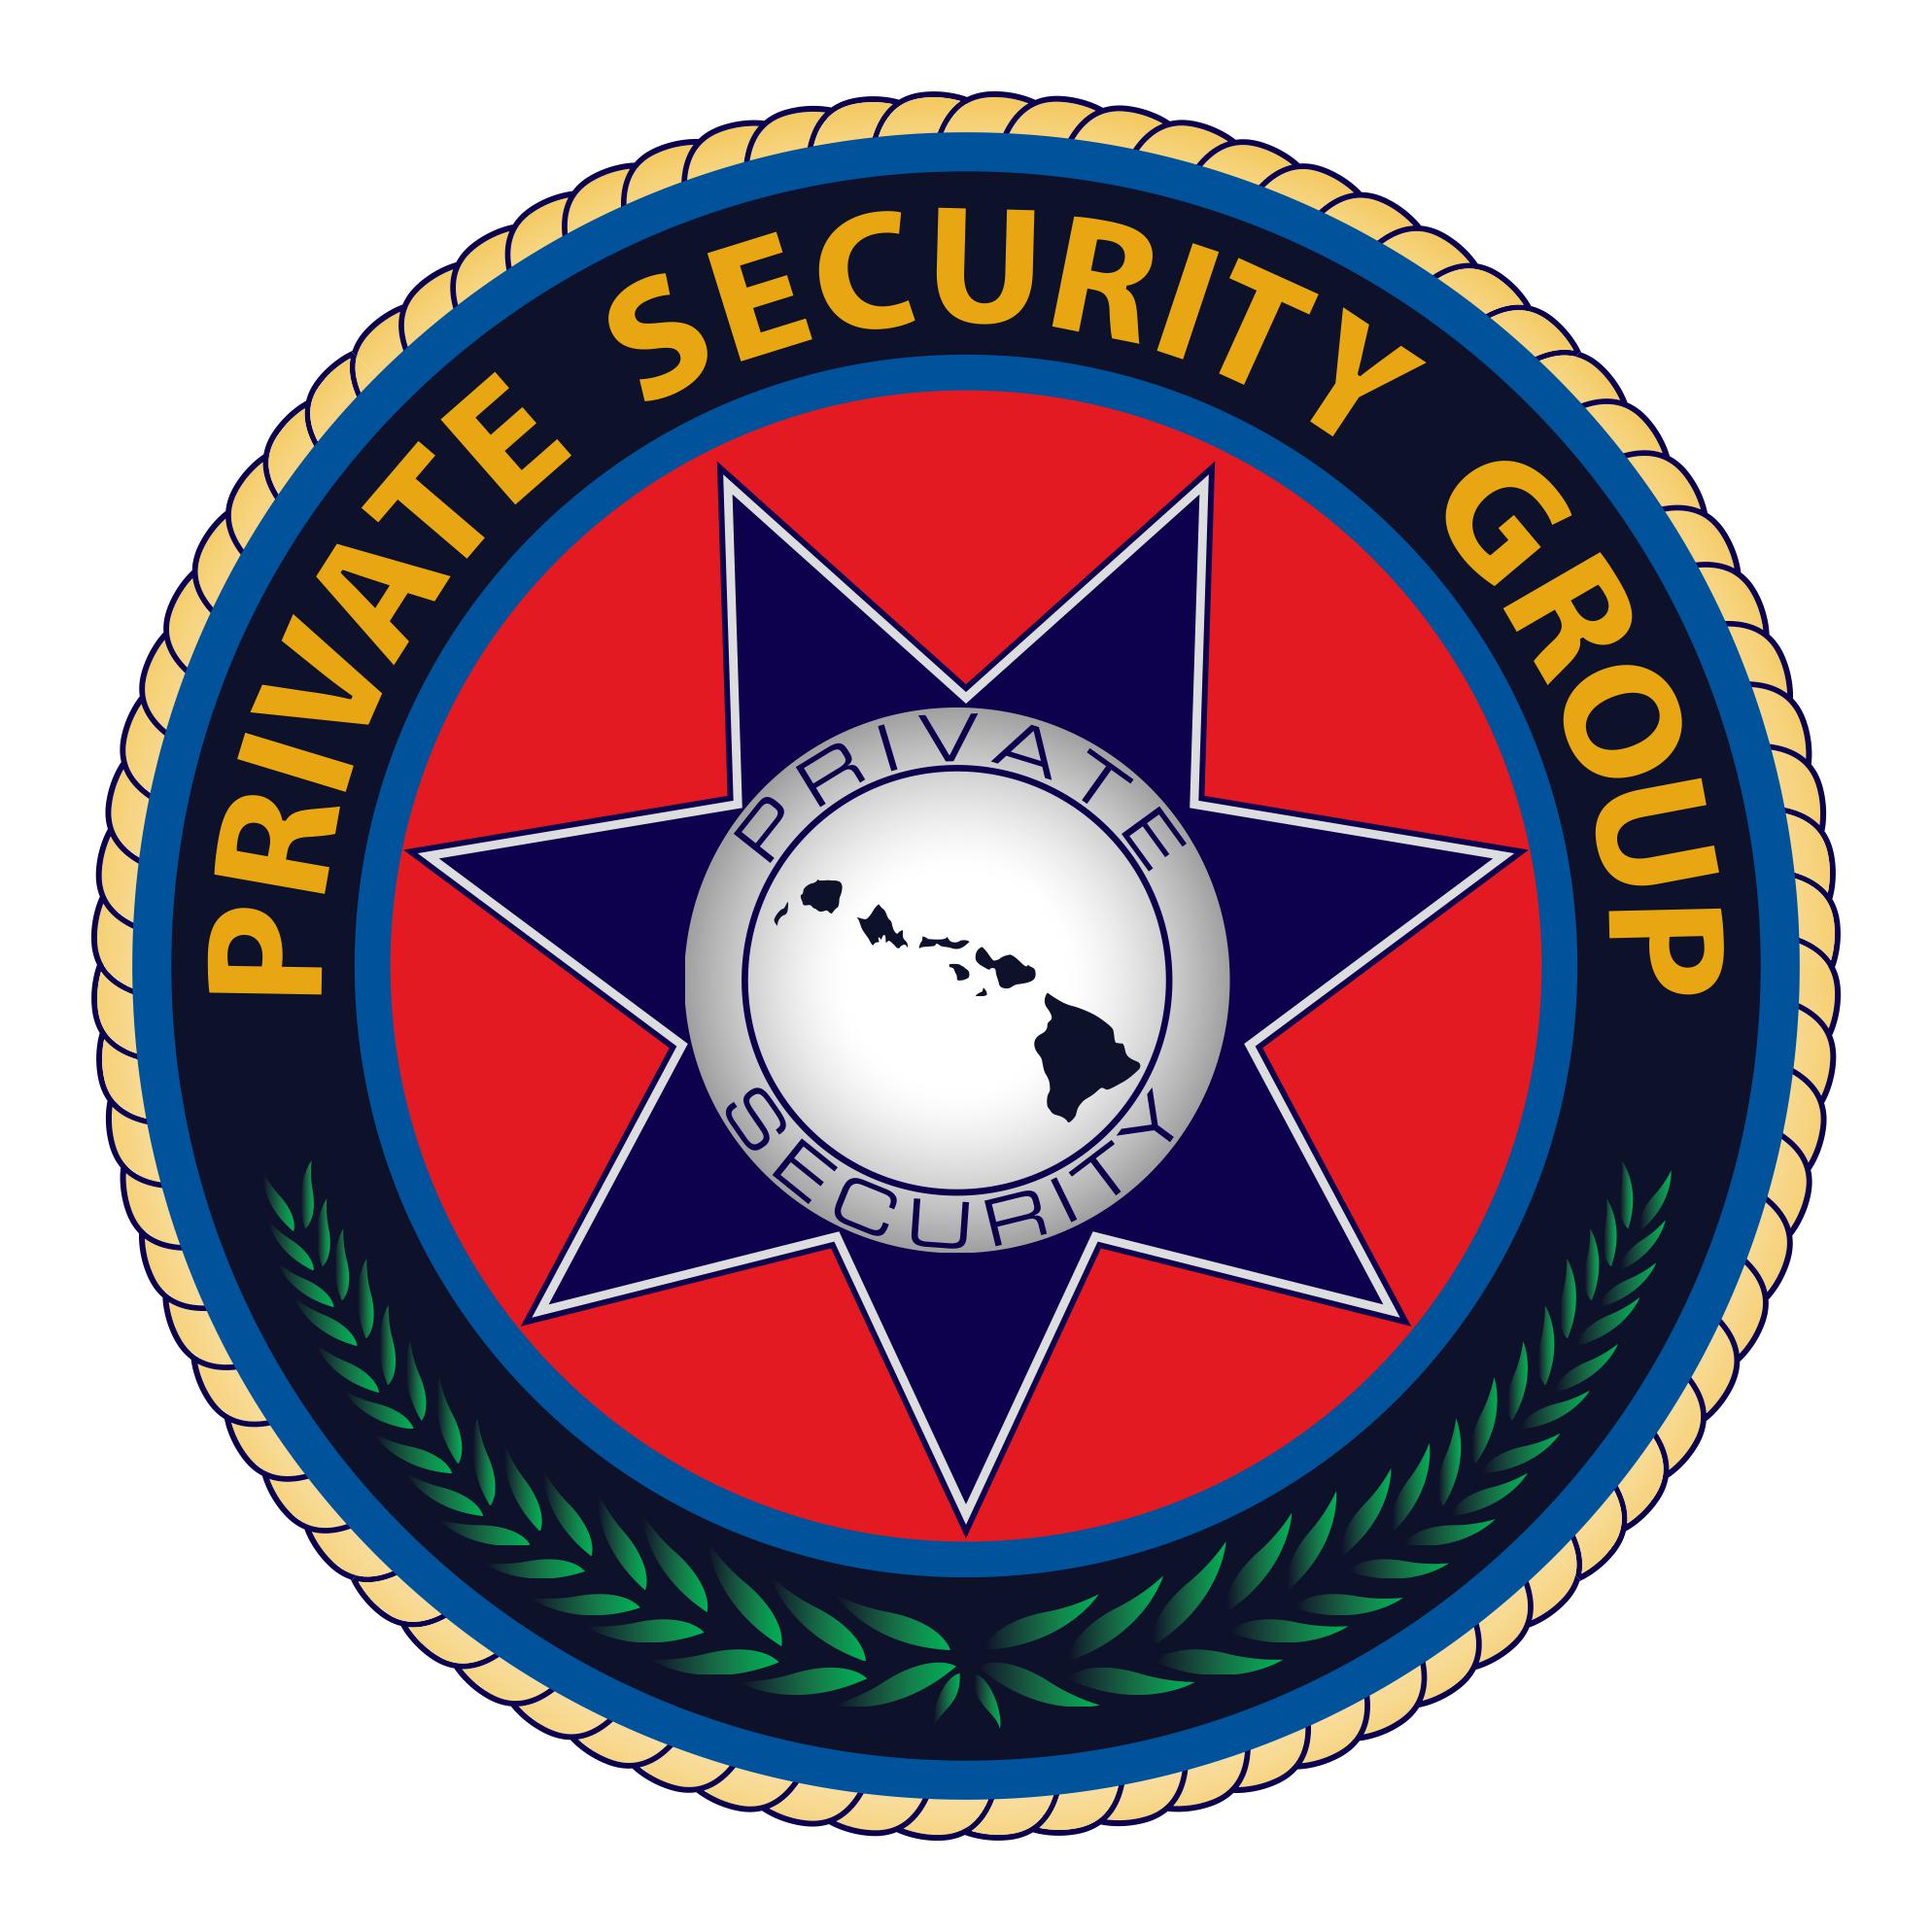 6. PRIVATE SECURITY GROUP (Silver)